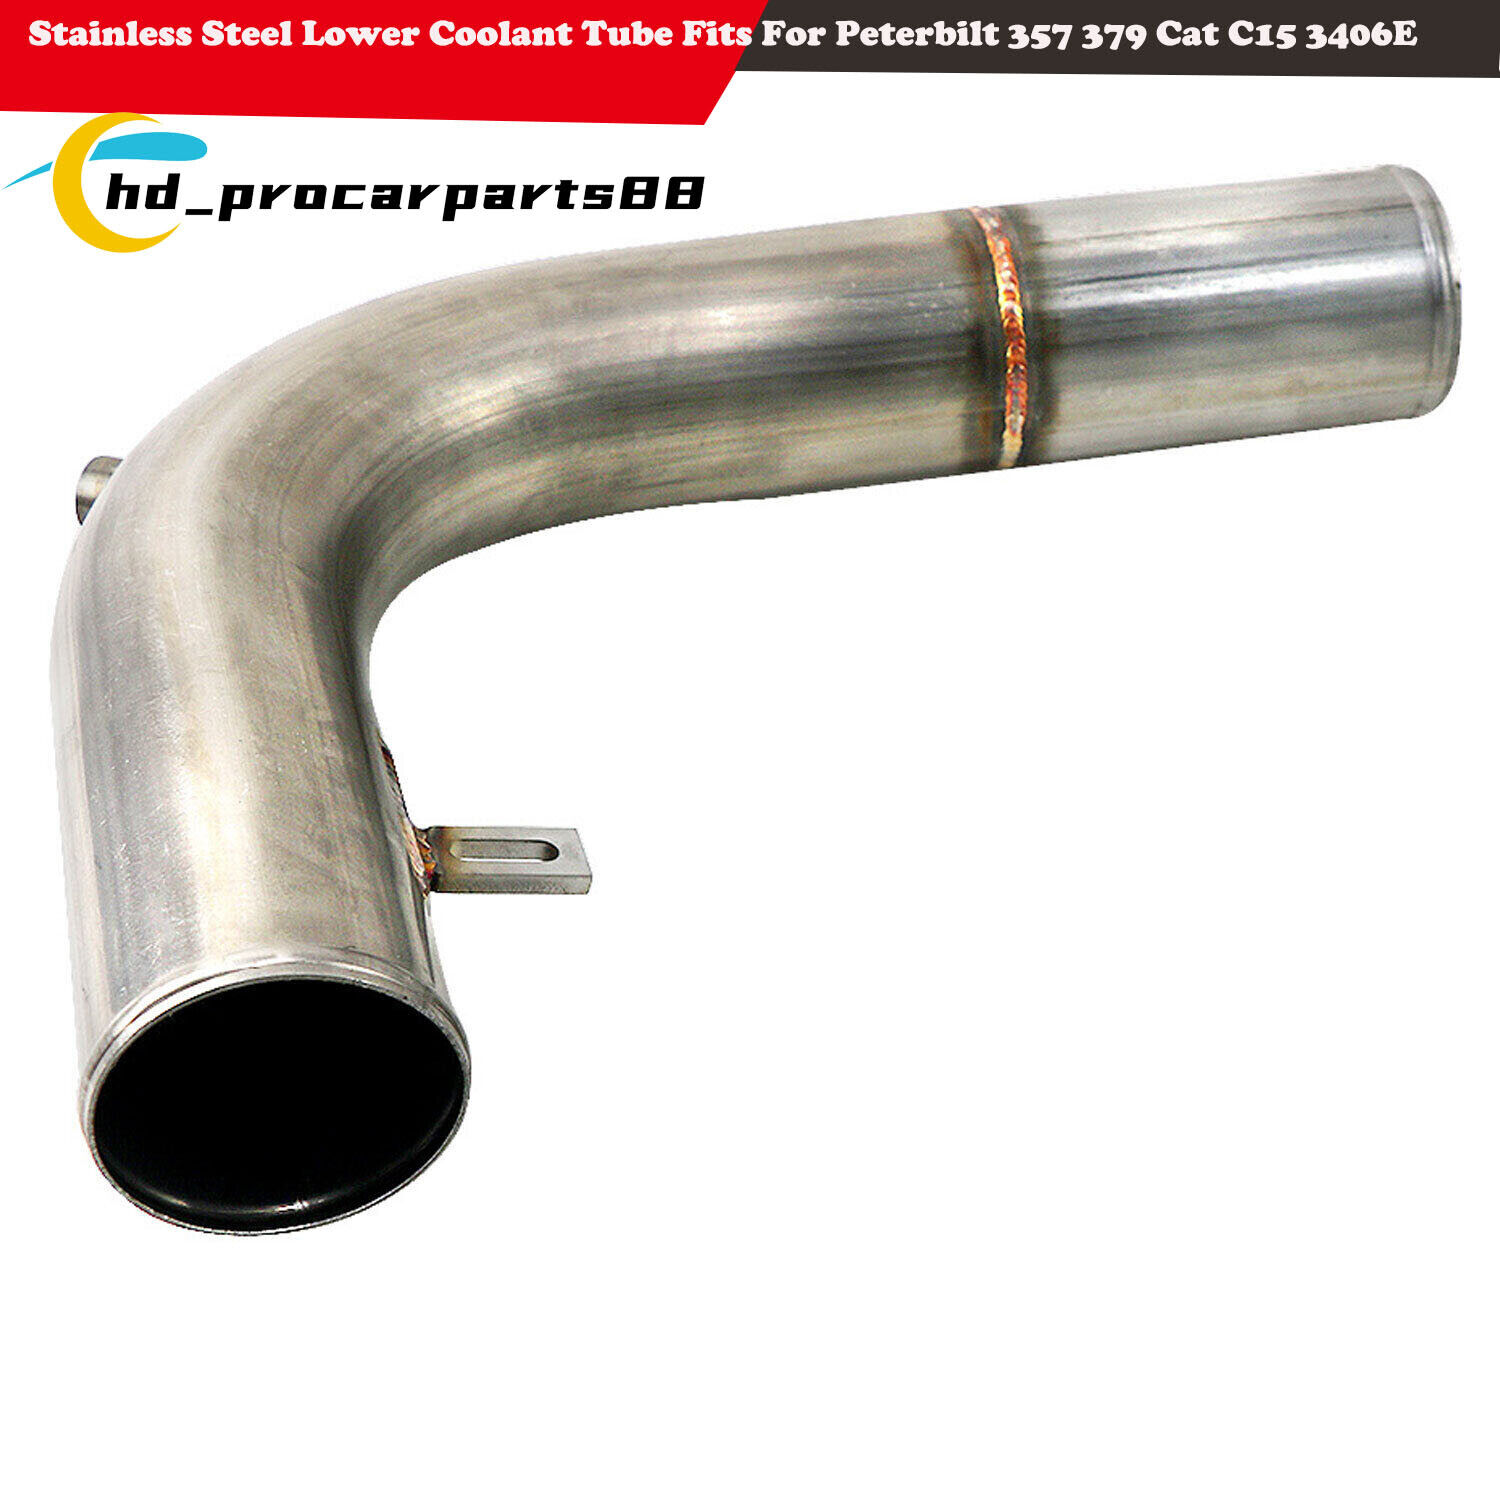 Lower Coolant Tube Fits Peterbilt 357 379 Cat C15 C16 3406E Stainless Steel New